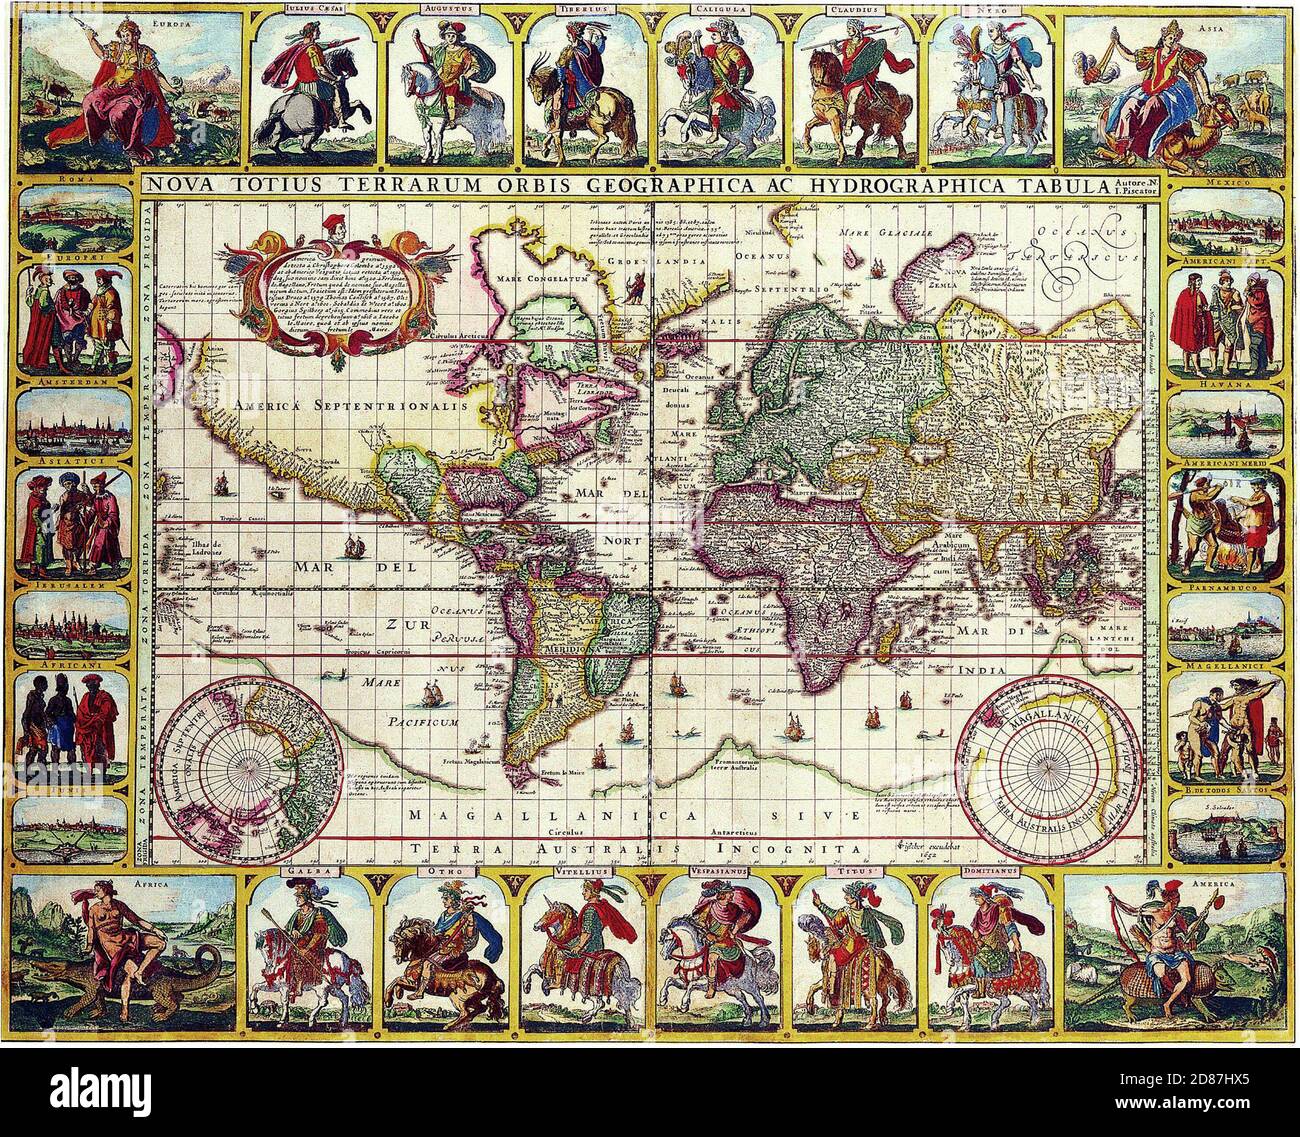 Illustrated old map of the World, vintage style full of details, Full of important persons, details and information. Stock Photo